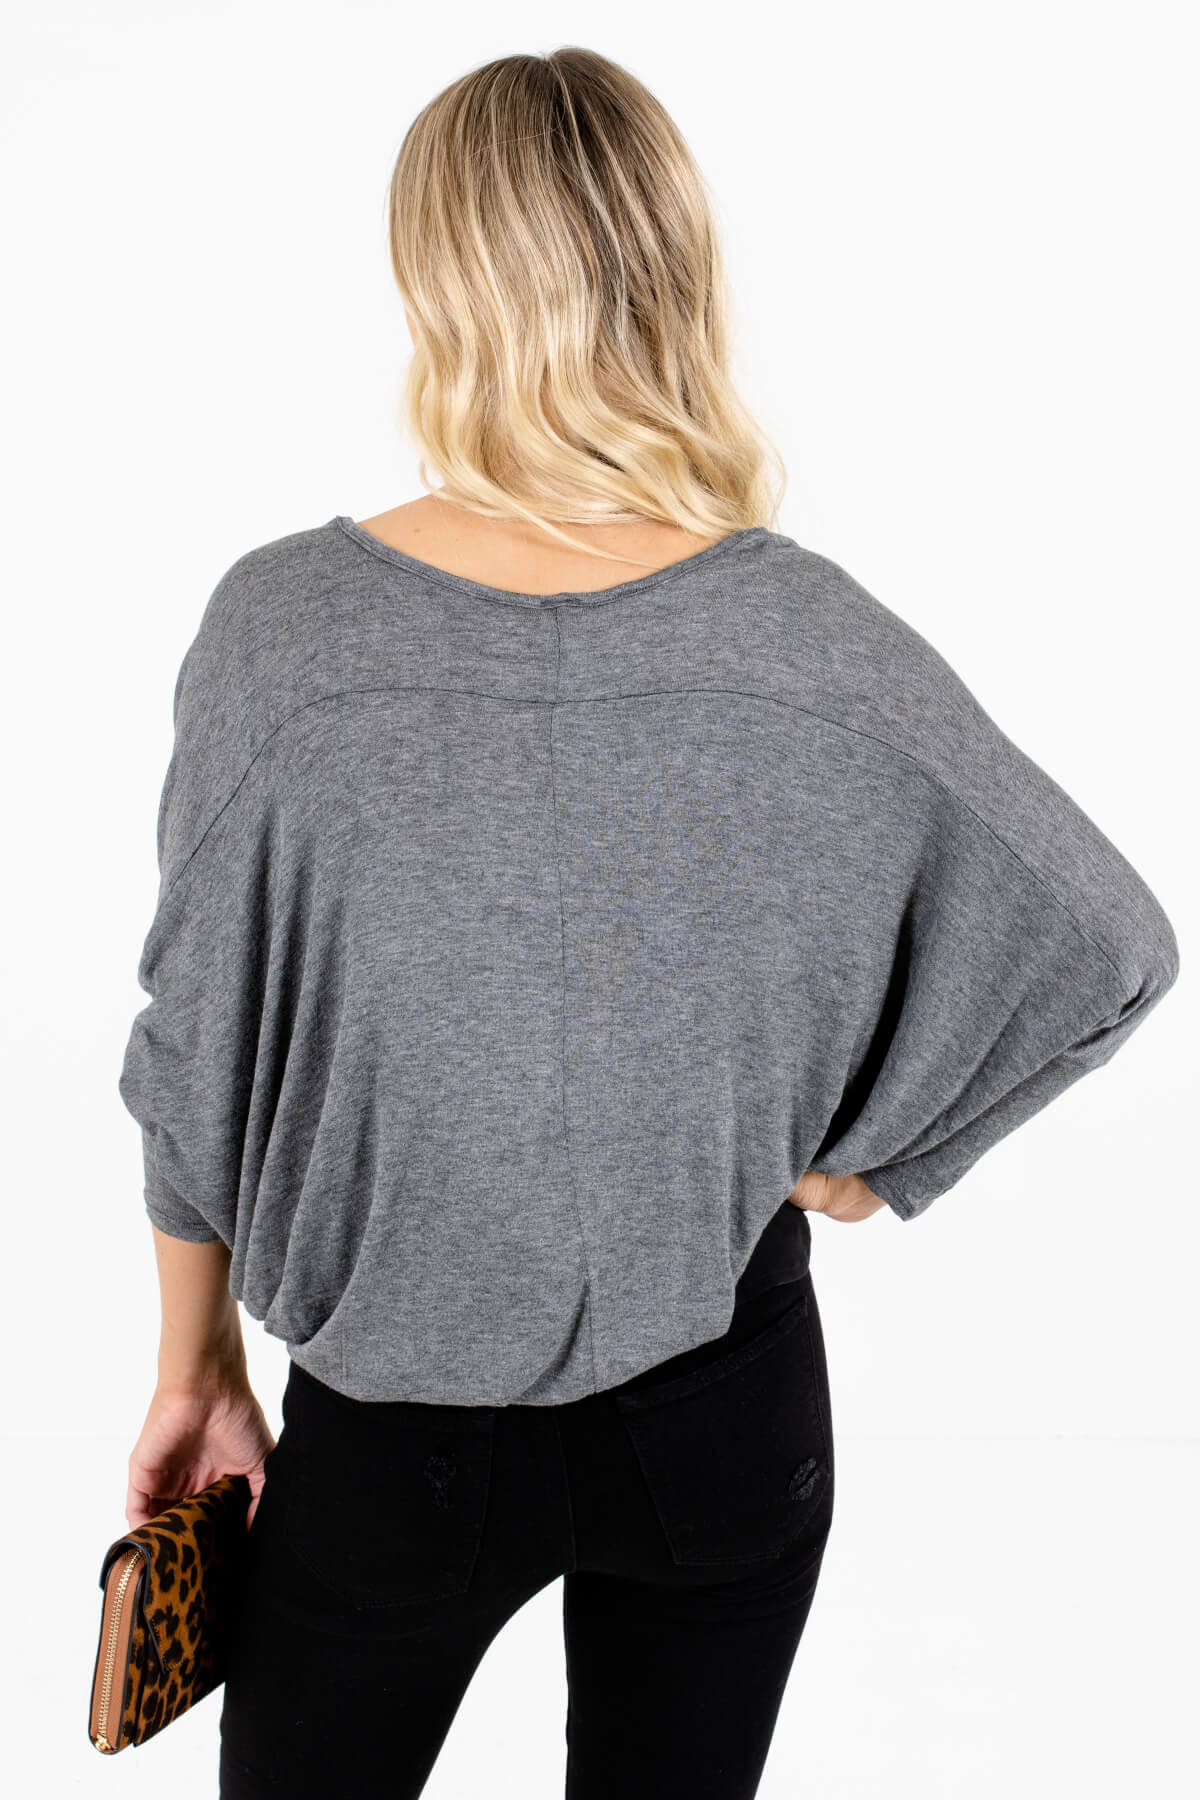 Women's Heather Gray Pleated Accents Boutique Top